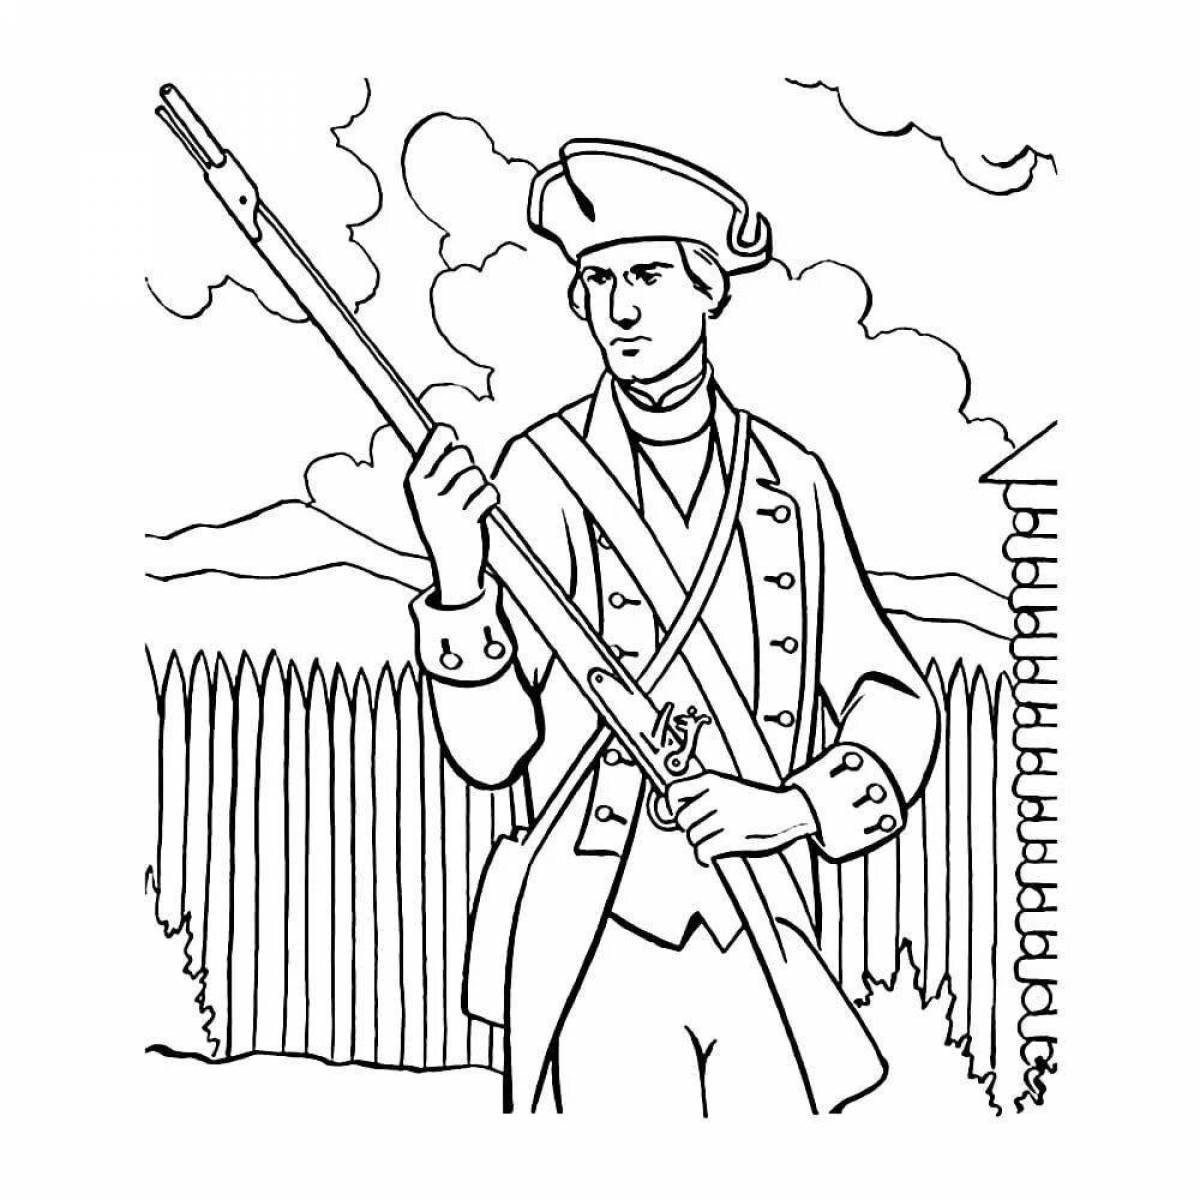 Coloring book brave Soviet soldier